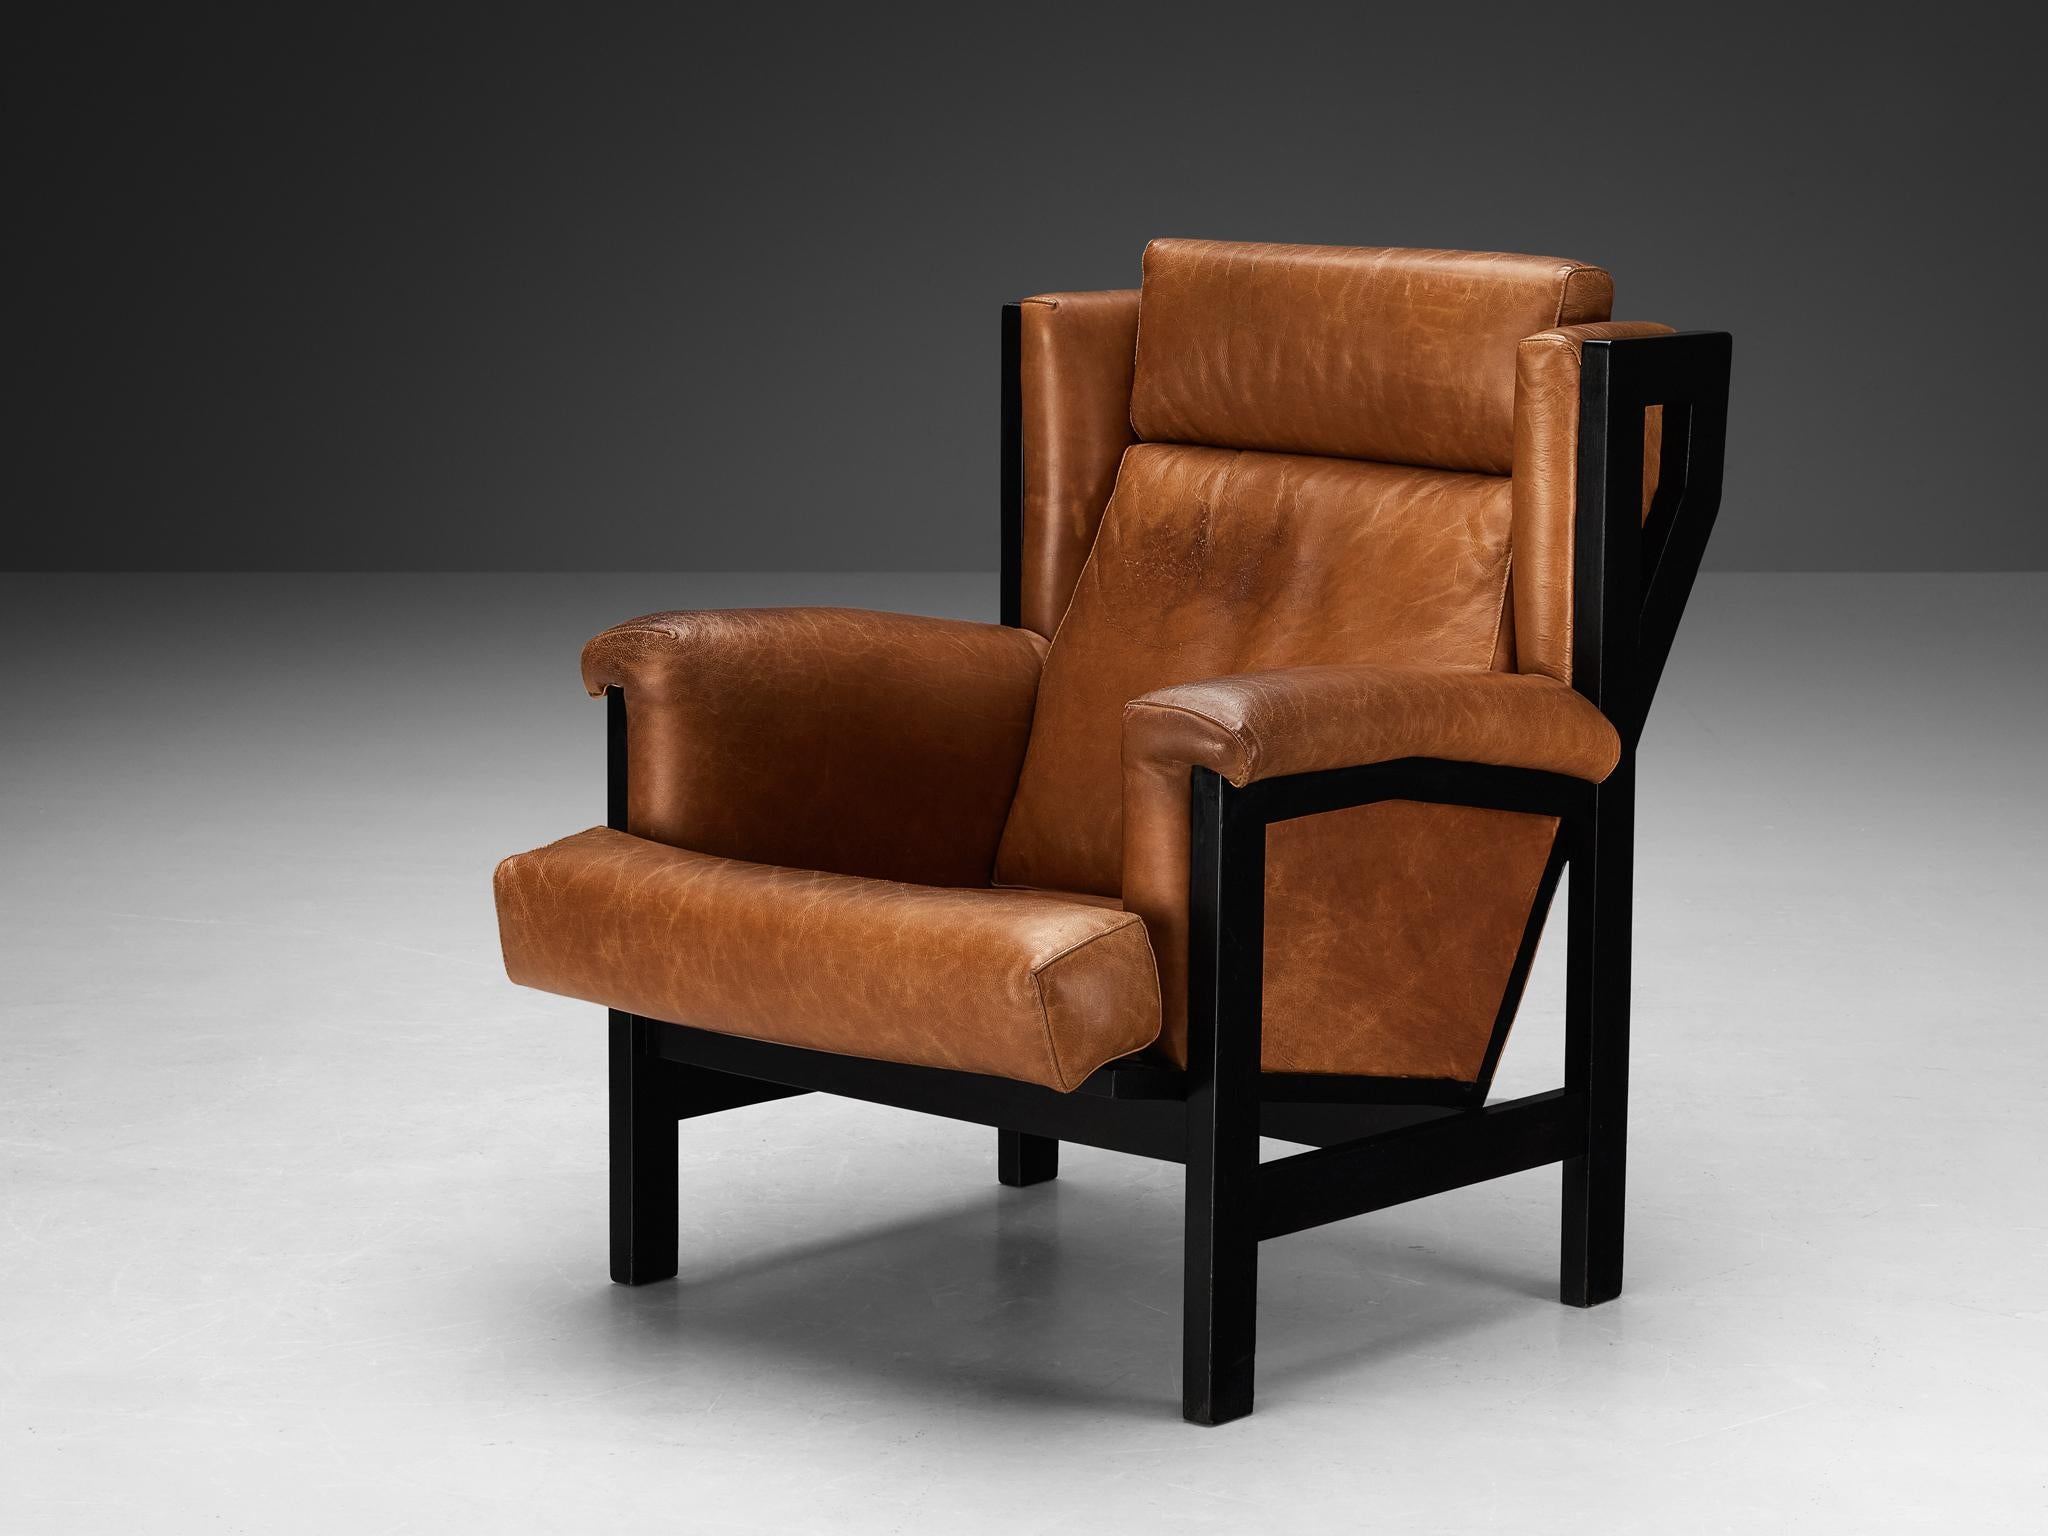 Rafael Carreras Puigdengolas for MYC-Gavina, 'San Remo' lounge chair, leather, lacquered wood, Spain, design 1963

Multi-disciplinary artist from Spanish origin, Rafael Carreras Puigdengolas (1933-2013), commenced his artistic path in various fields